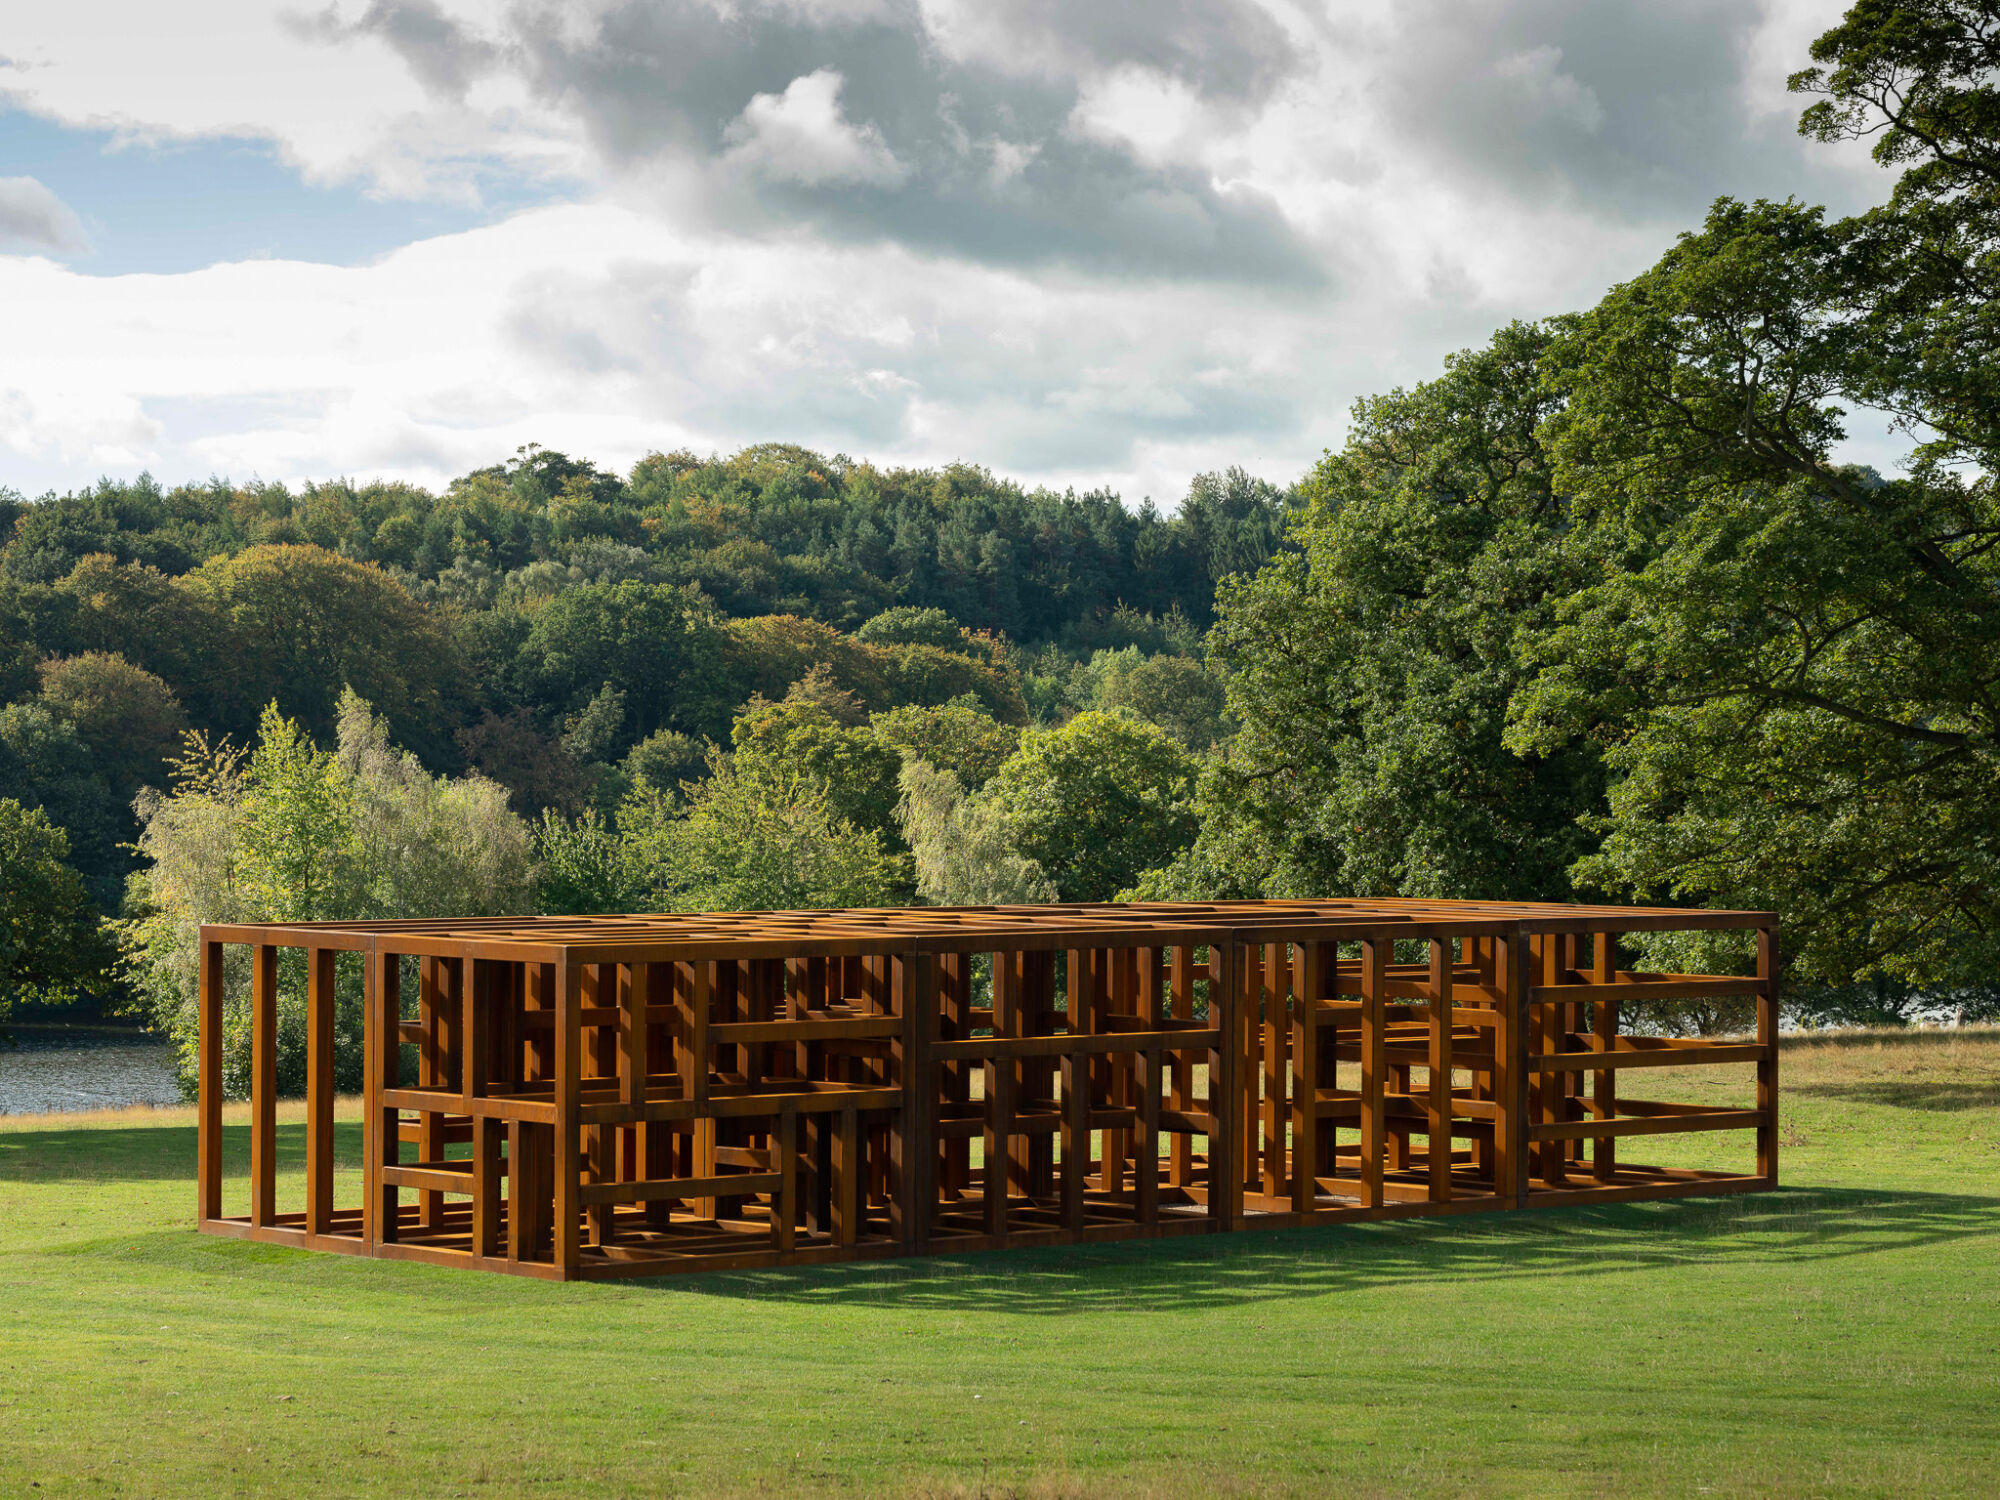 The Wick - Sean Scully  Crate of Air, 2018 Corten steel 3.6 x 19.2 x 7.2 m © Sean Scully; Courtesy Lisson Gallery and Thaddaeus Ropac gallery